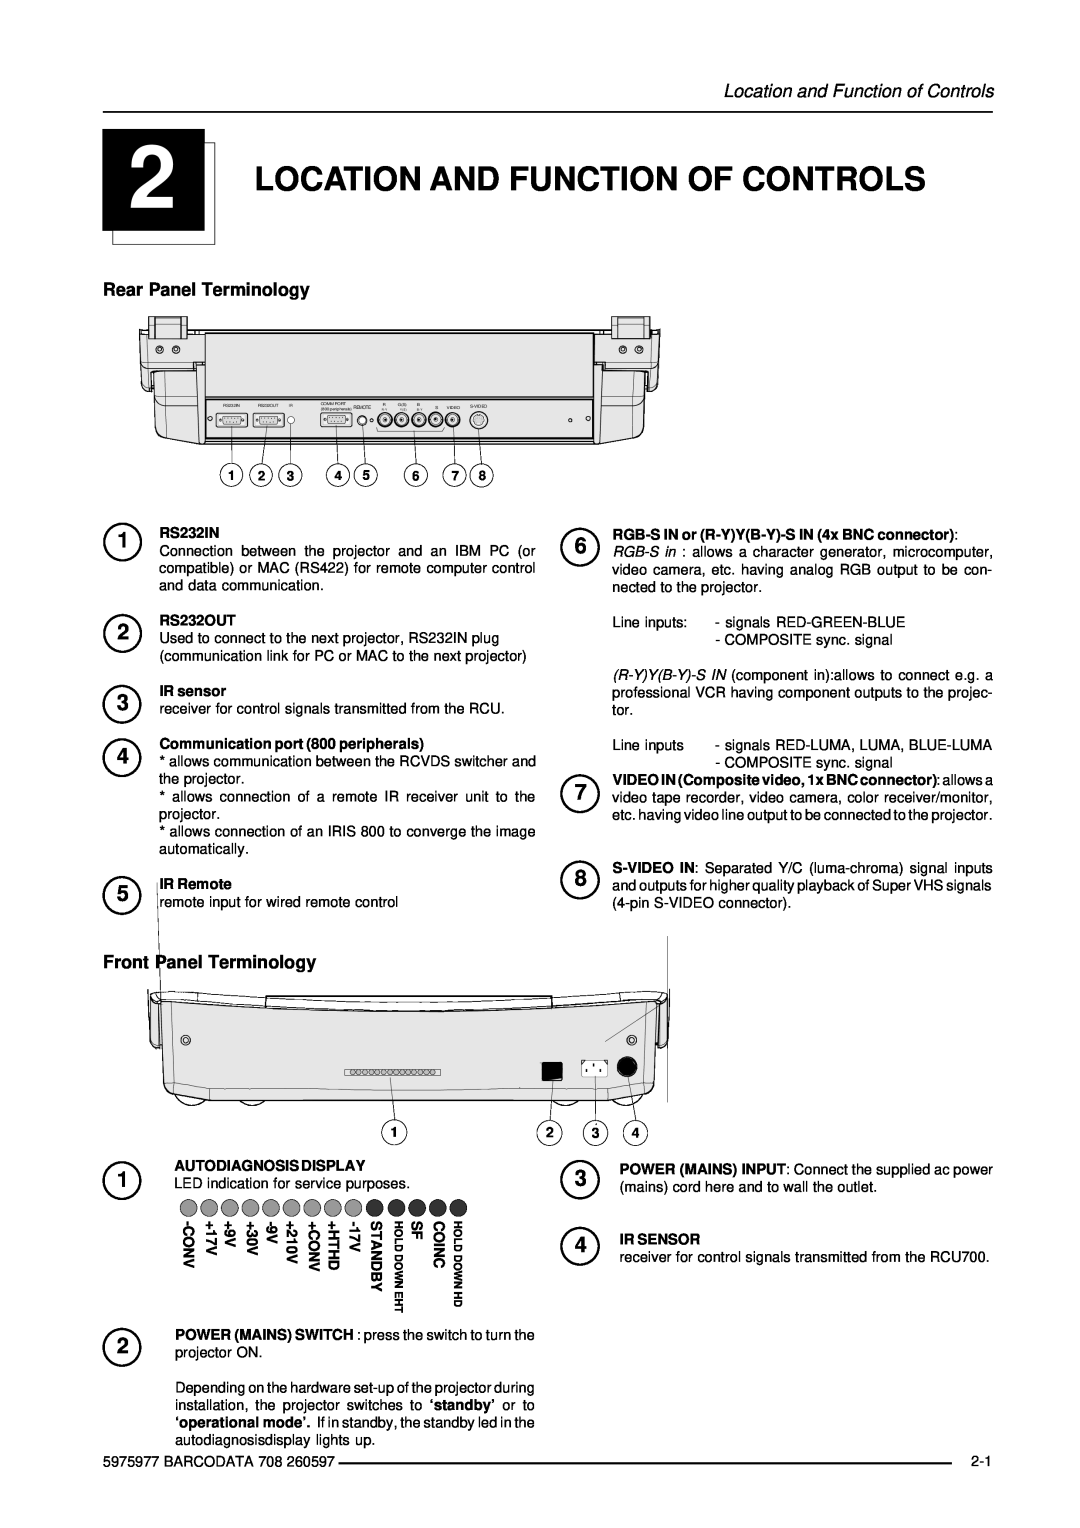 Barco R9002120 Location And Function Of Controls, Location and Function of Controls, Rear Panel Terminology, RS232IN, Conv 